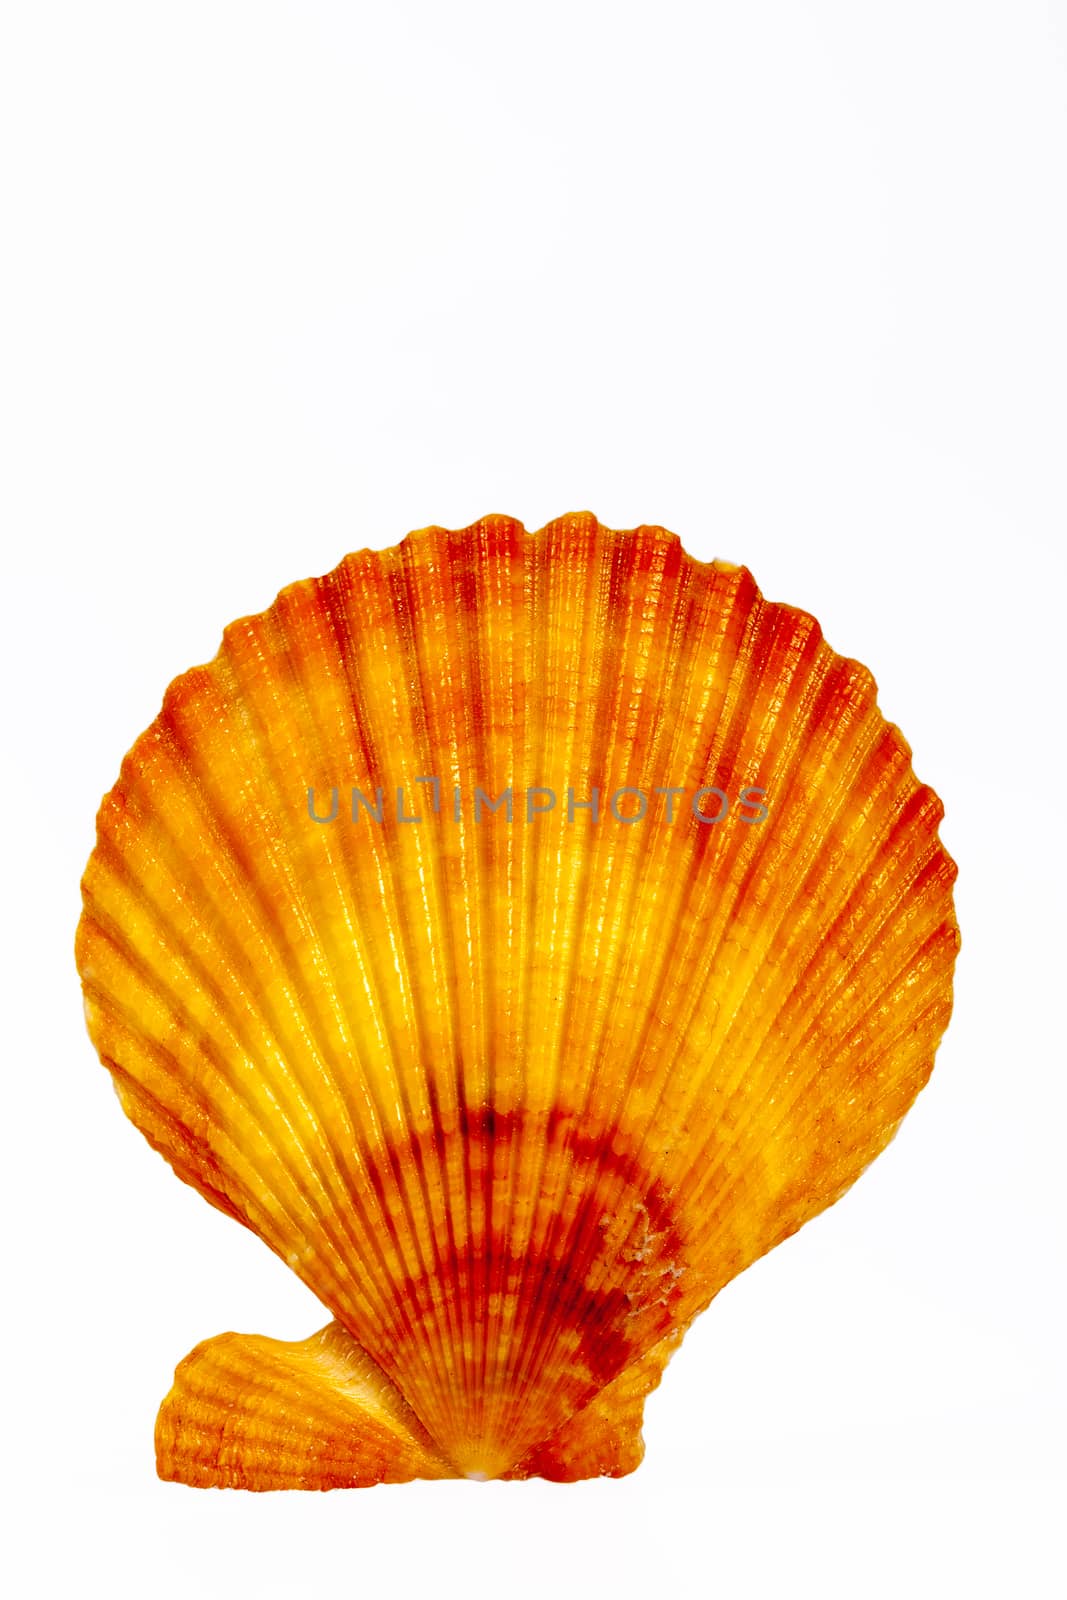 Sea shell of mollusk isolated on white background, close up by mychadre77